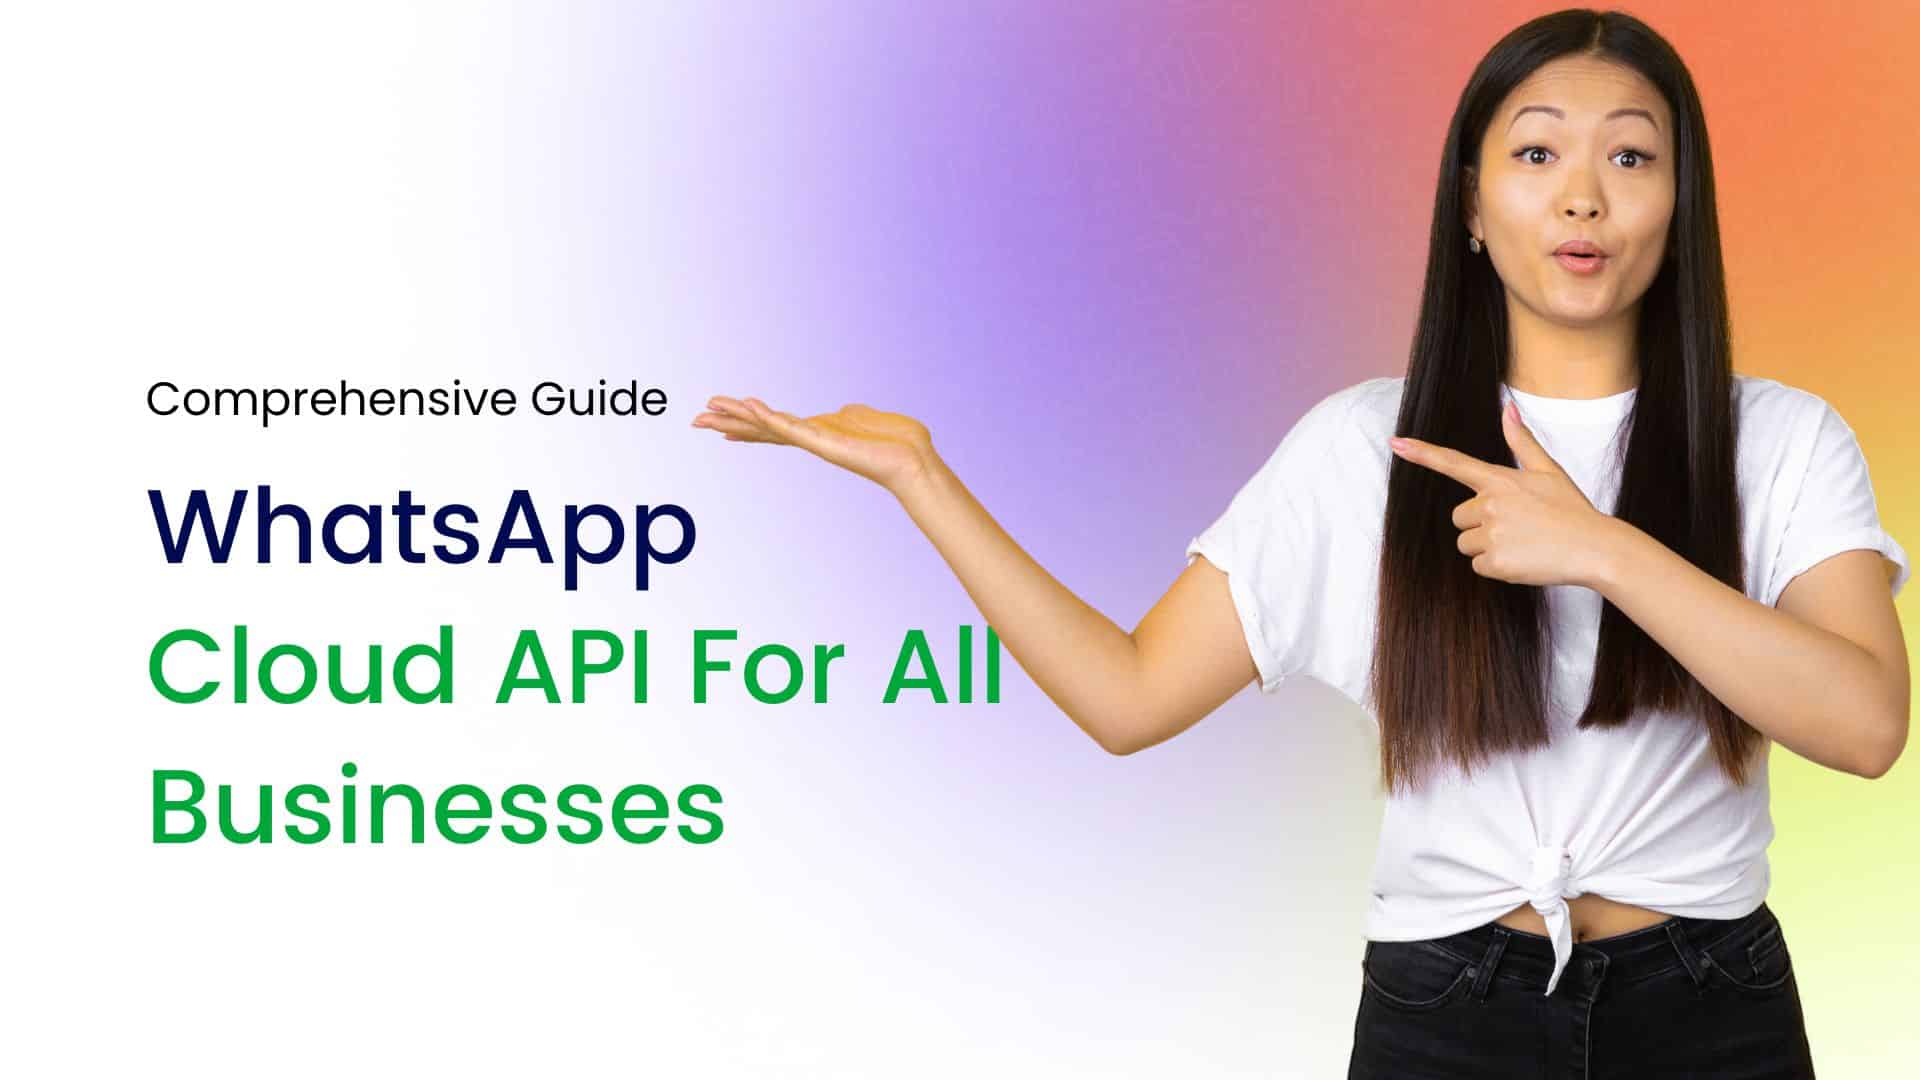 WhatsApp Cloud API For All Businesses